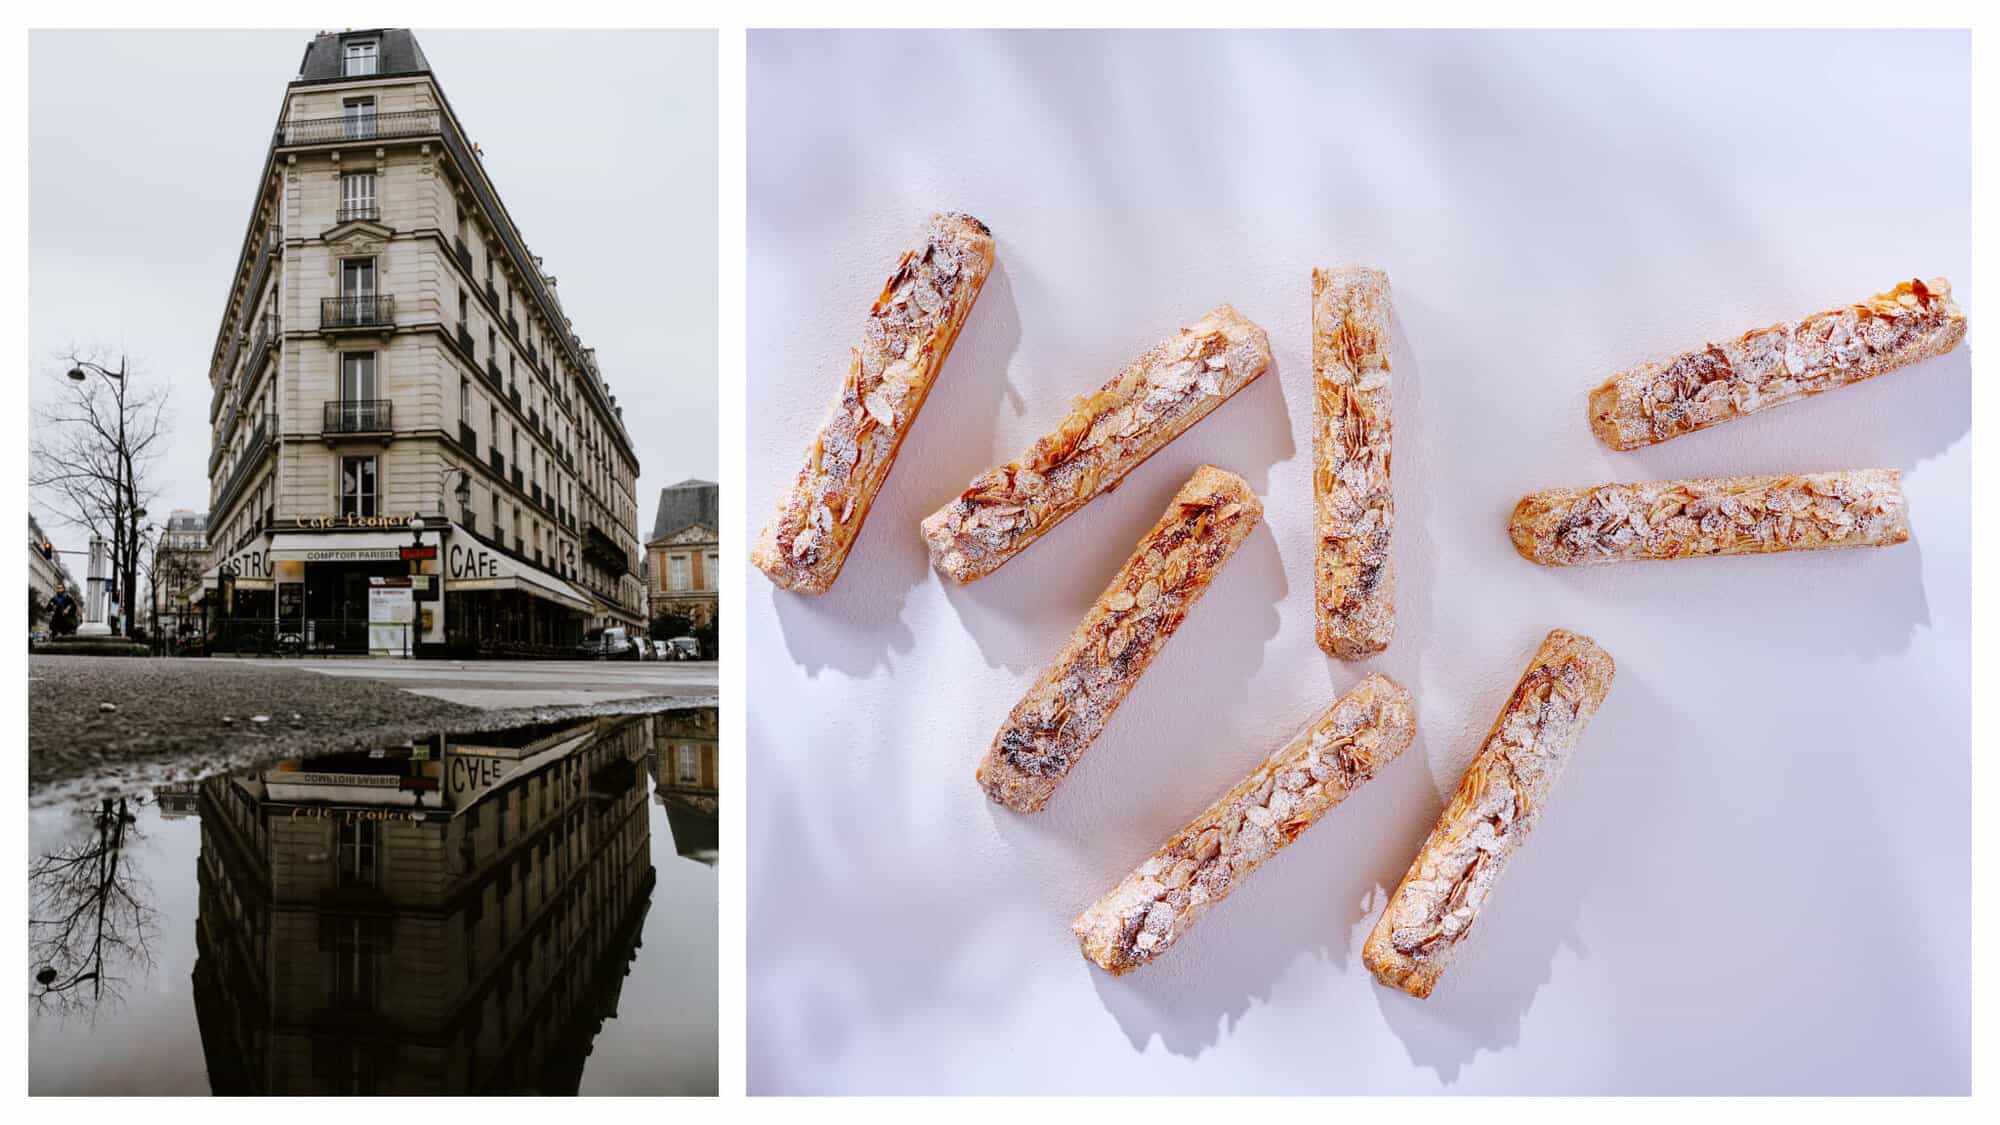 Left: A Parisian Haussmann-style building on a corner with a puddle in the foreground reflecting the building. Right: individual bar-shaped crousti galettes des rois by The Ritz Paris Le Comptoir. 